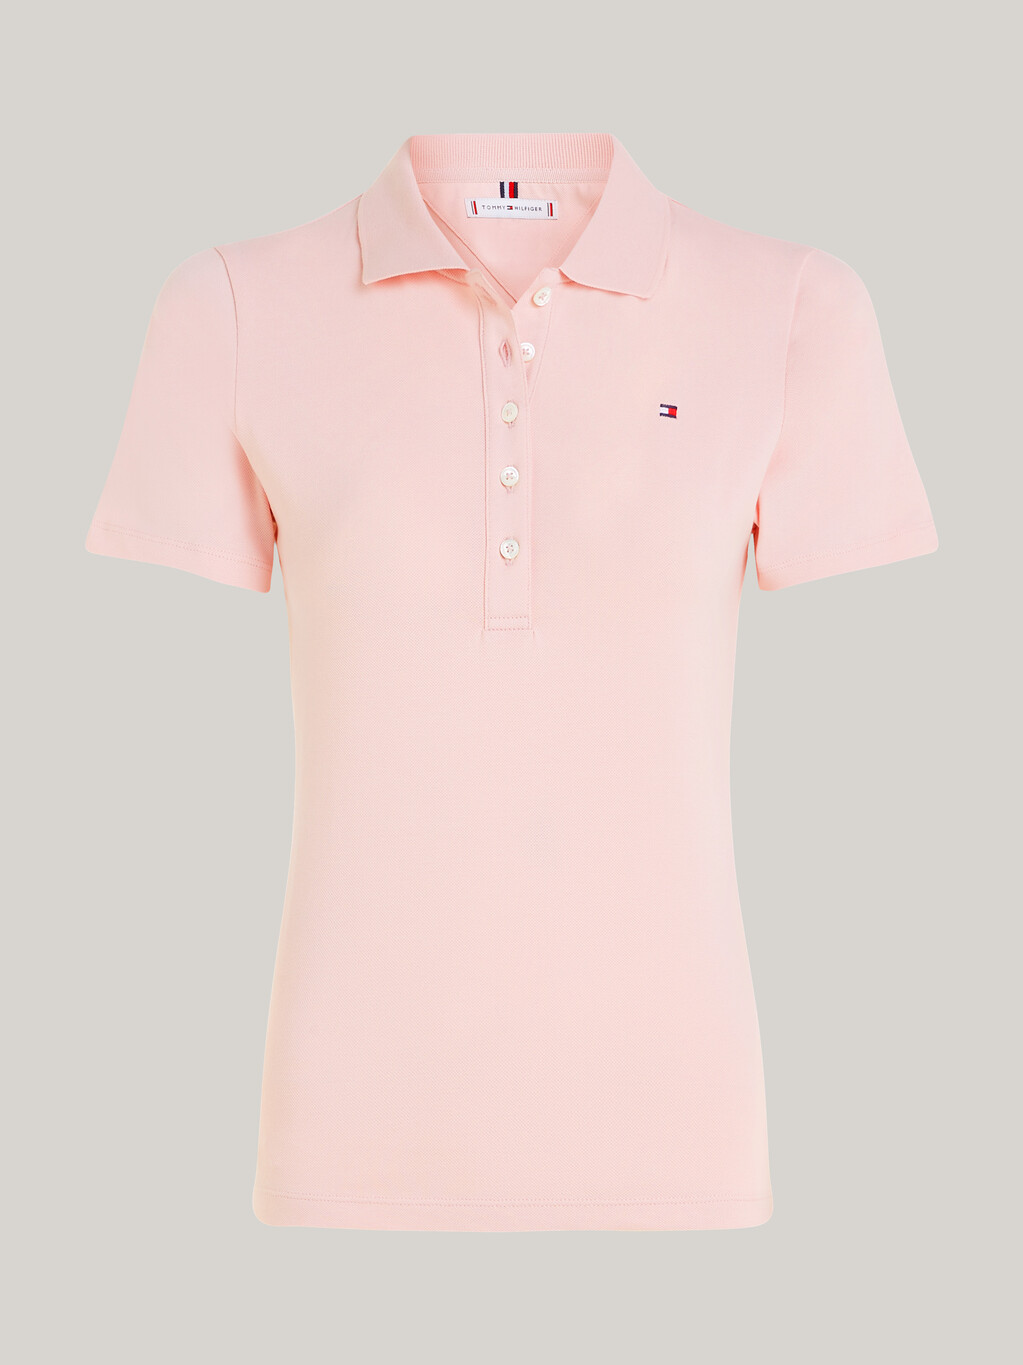 1985 Collection Slim Fit Polo, Whimsy Pink, hi-res